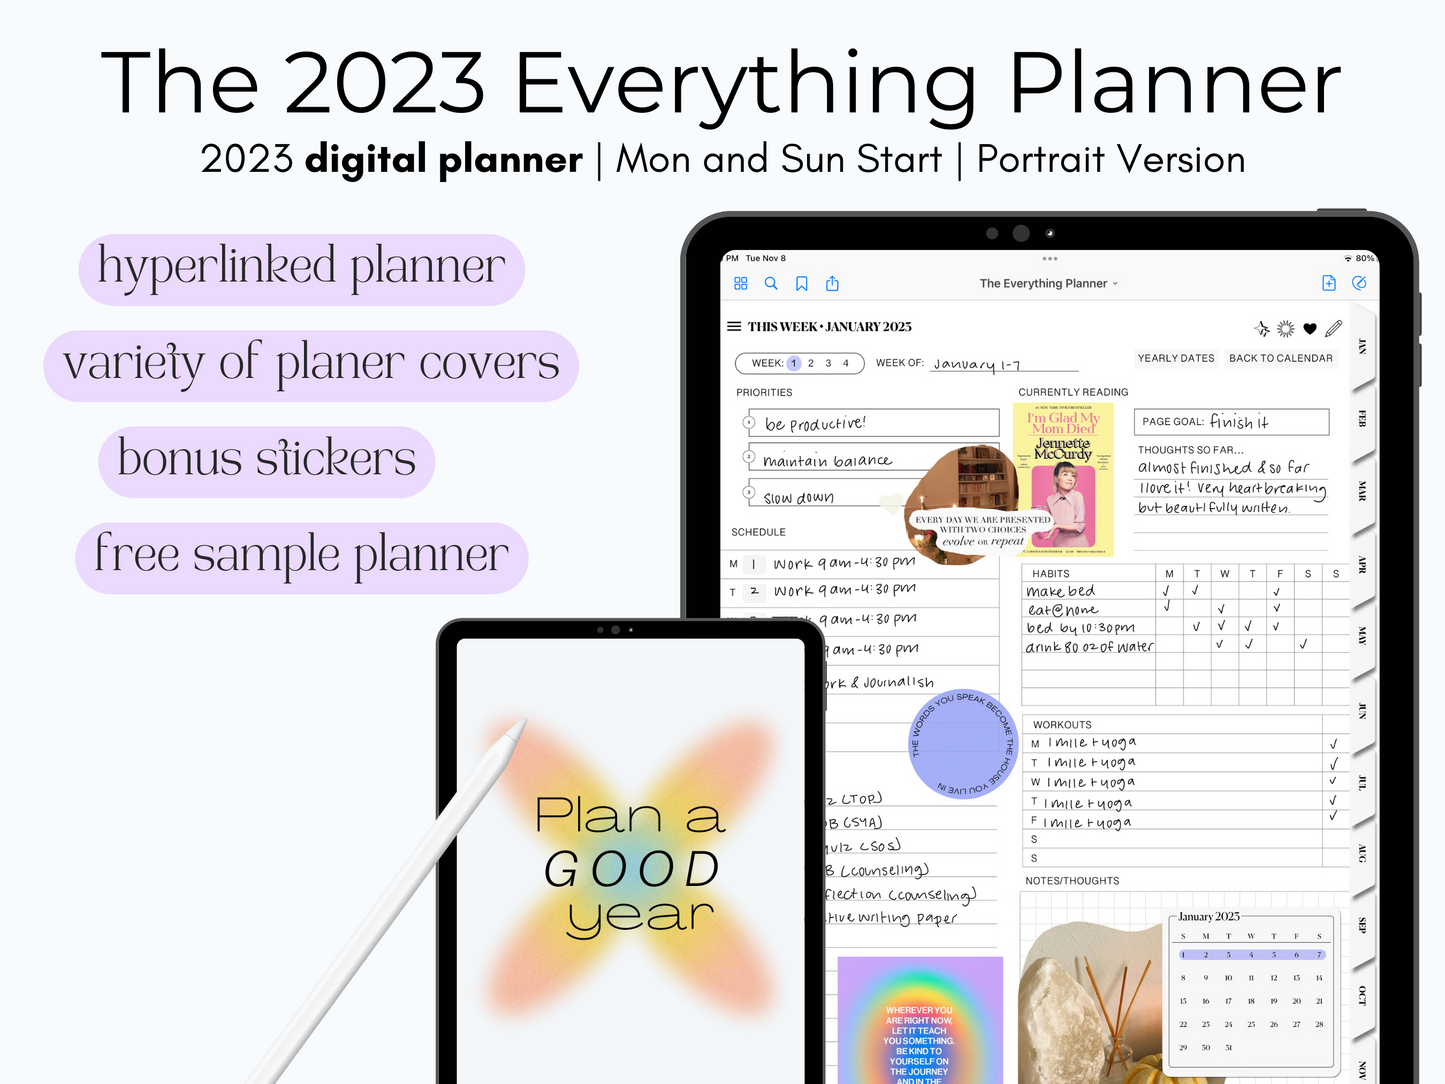 The 2023 Everything Planner: Portrait